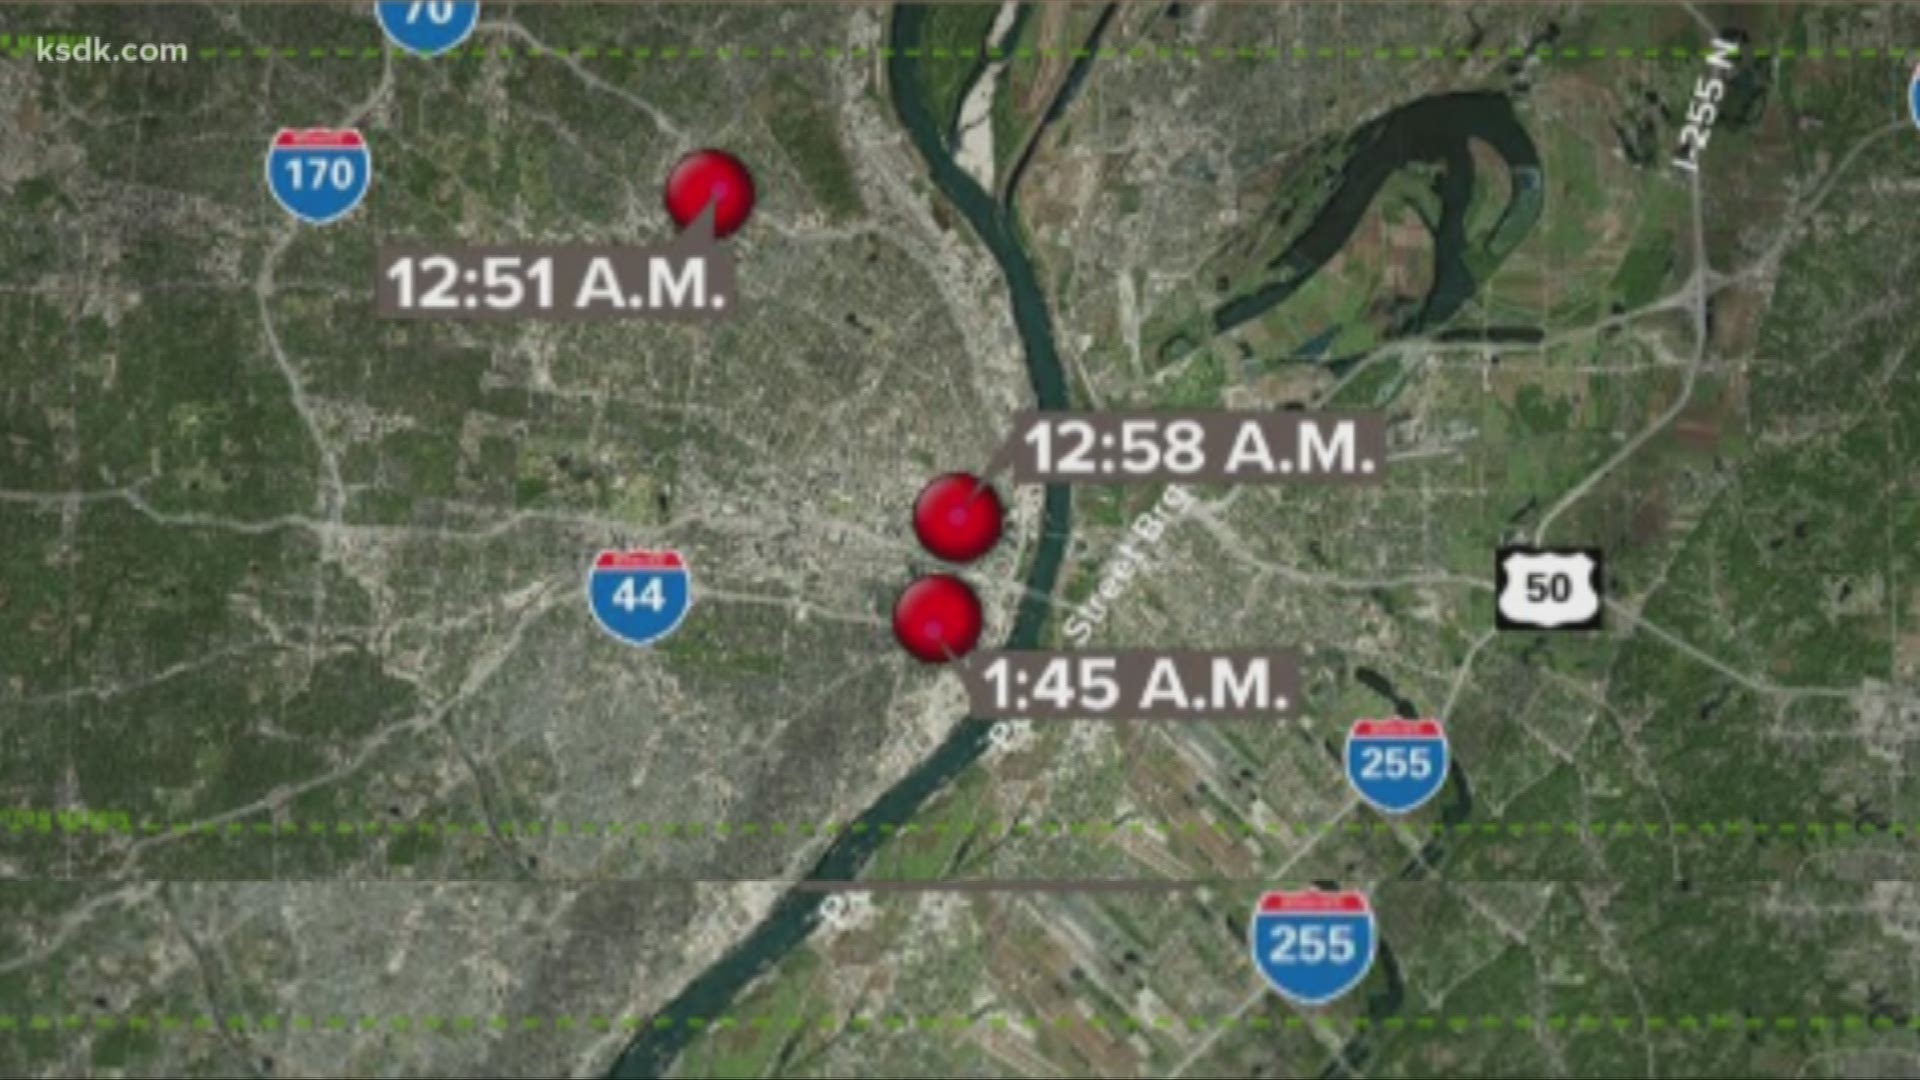 Seven people were shot within an hour overnight in St. Louis. All of the victims survived their injuries.